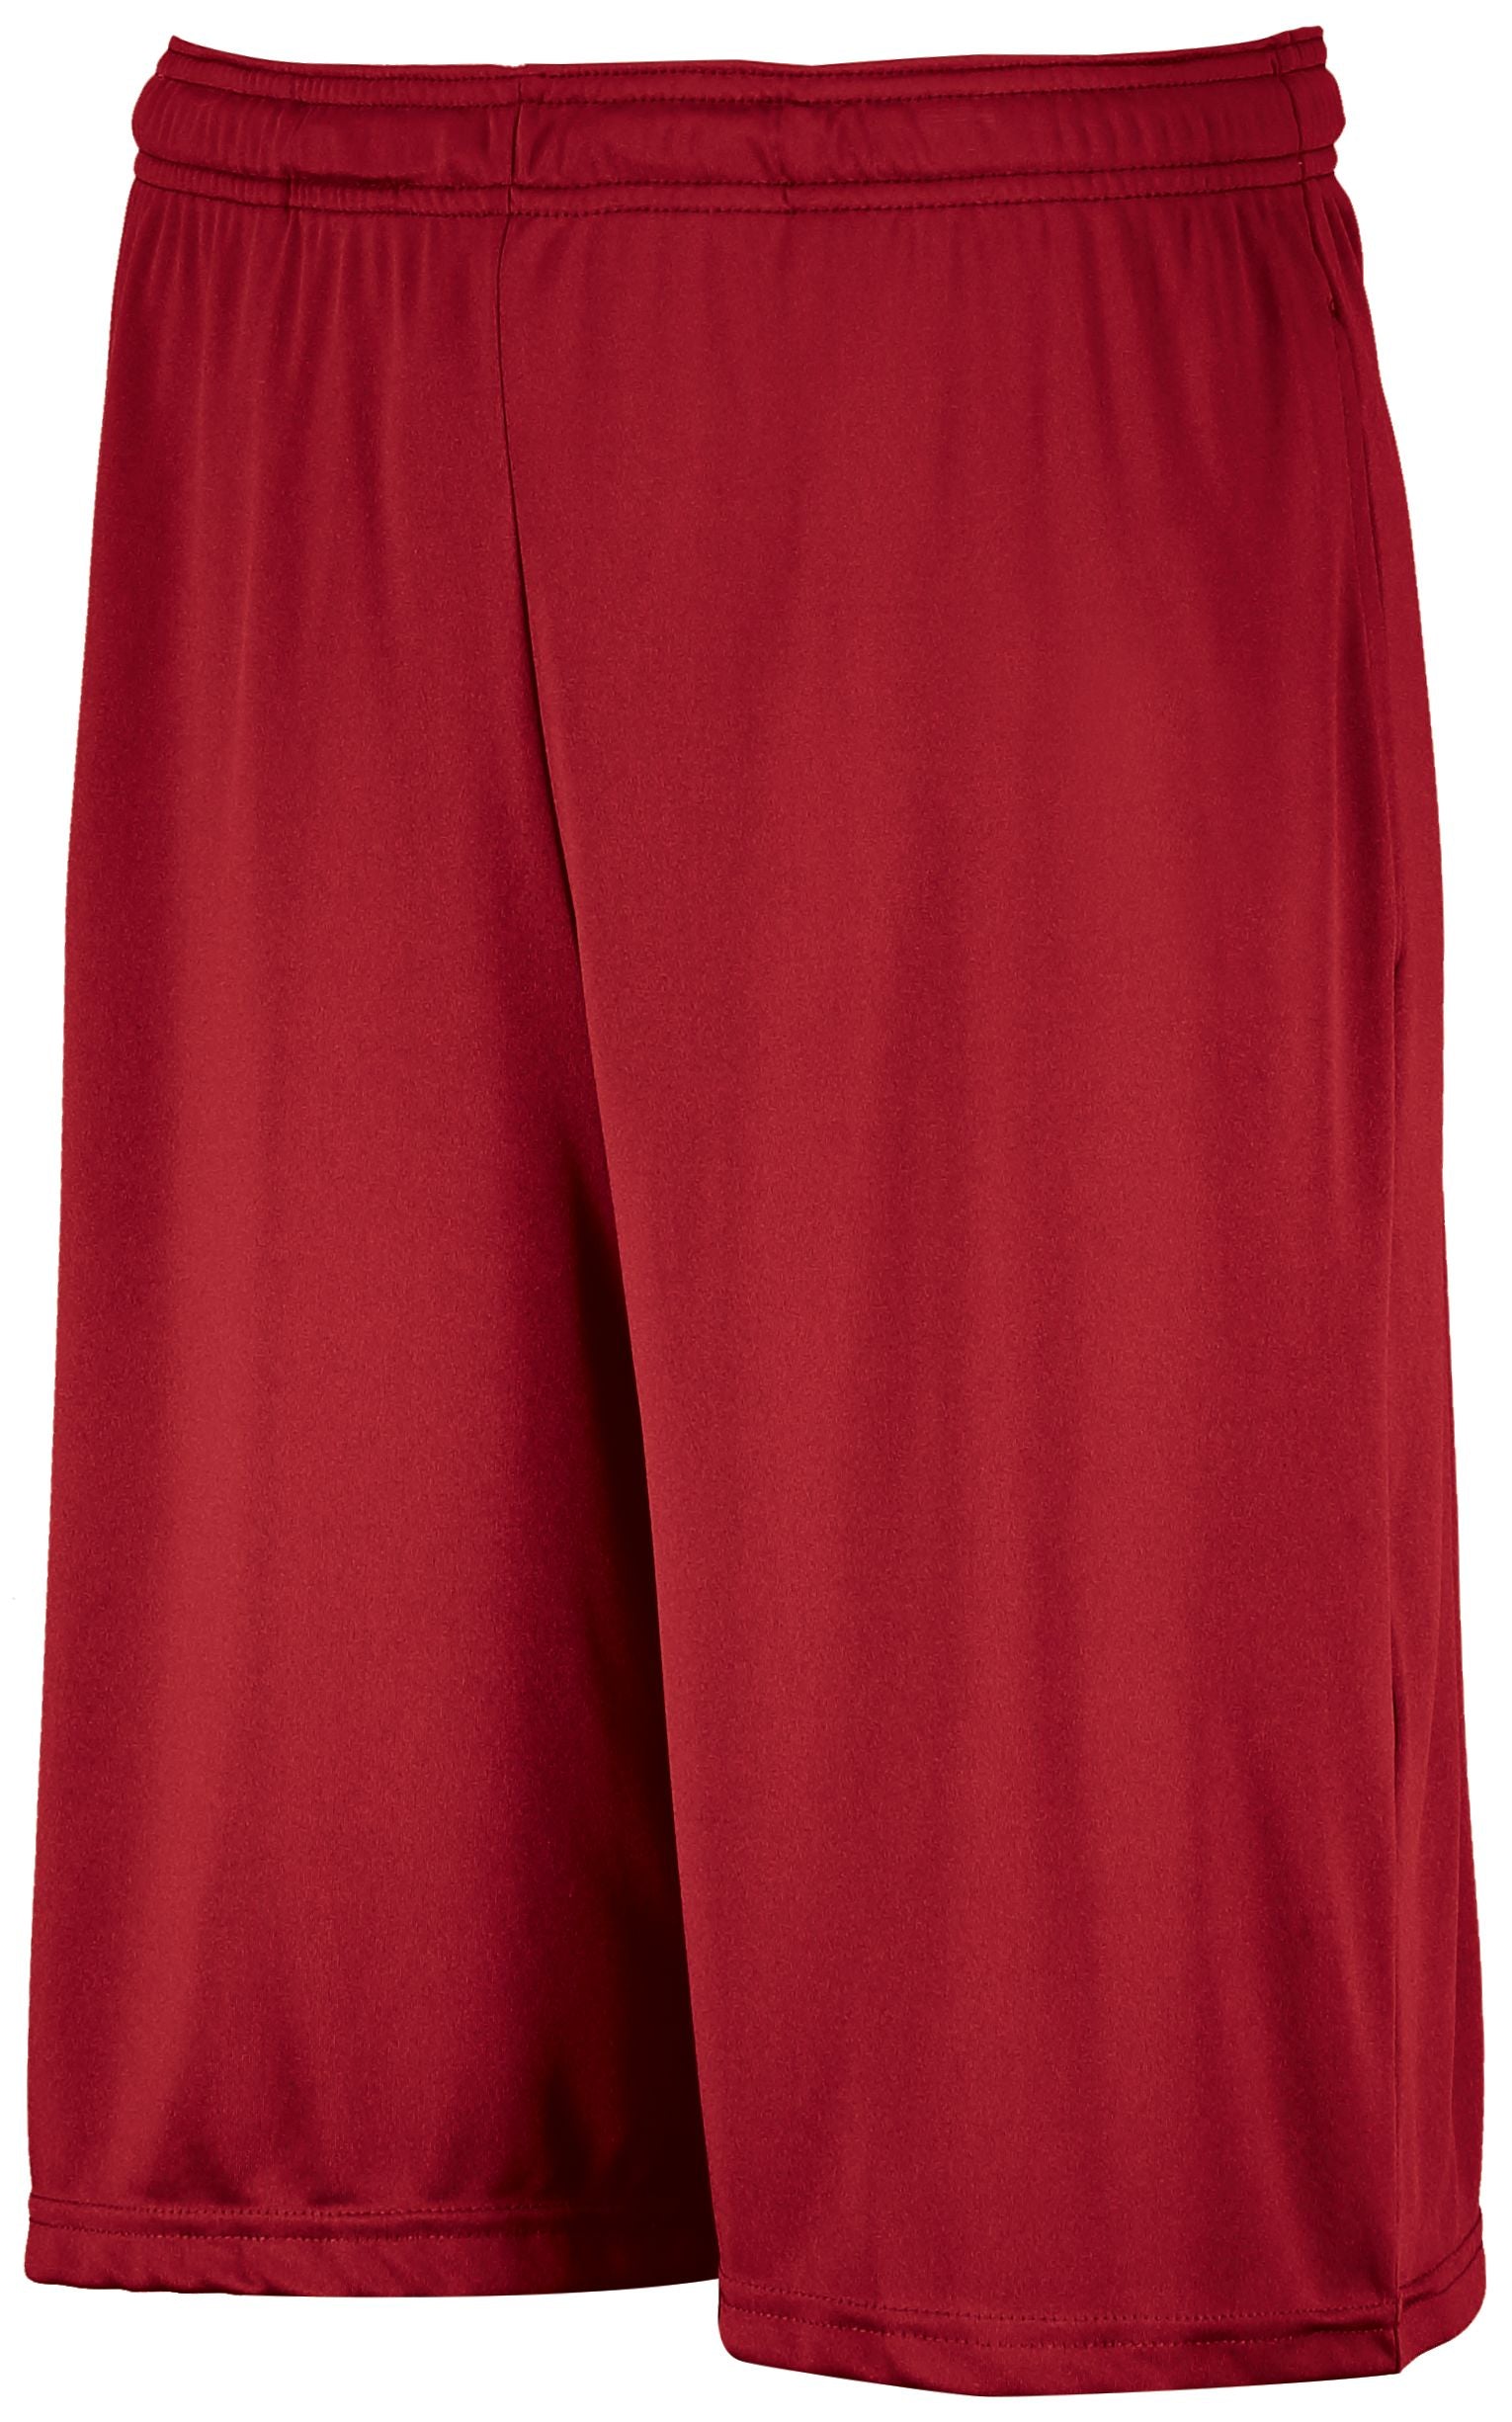 Russell Athletic Dri-Power Essential Performance Shorts With Pockets in True Red  -Part of the Adult, Adult-Shorts, Russell-Athletic-Products product lines at KanaleyCreations.com